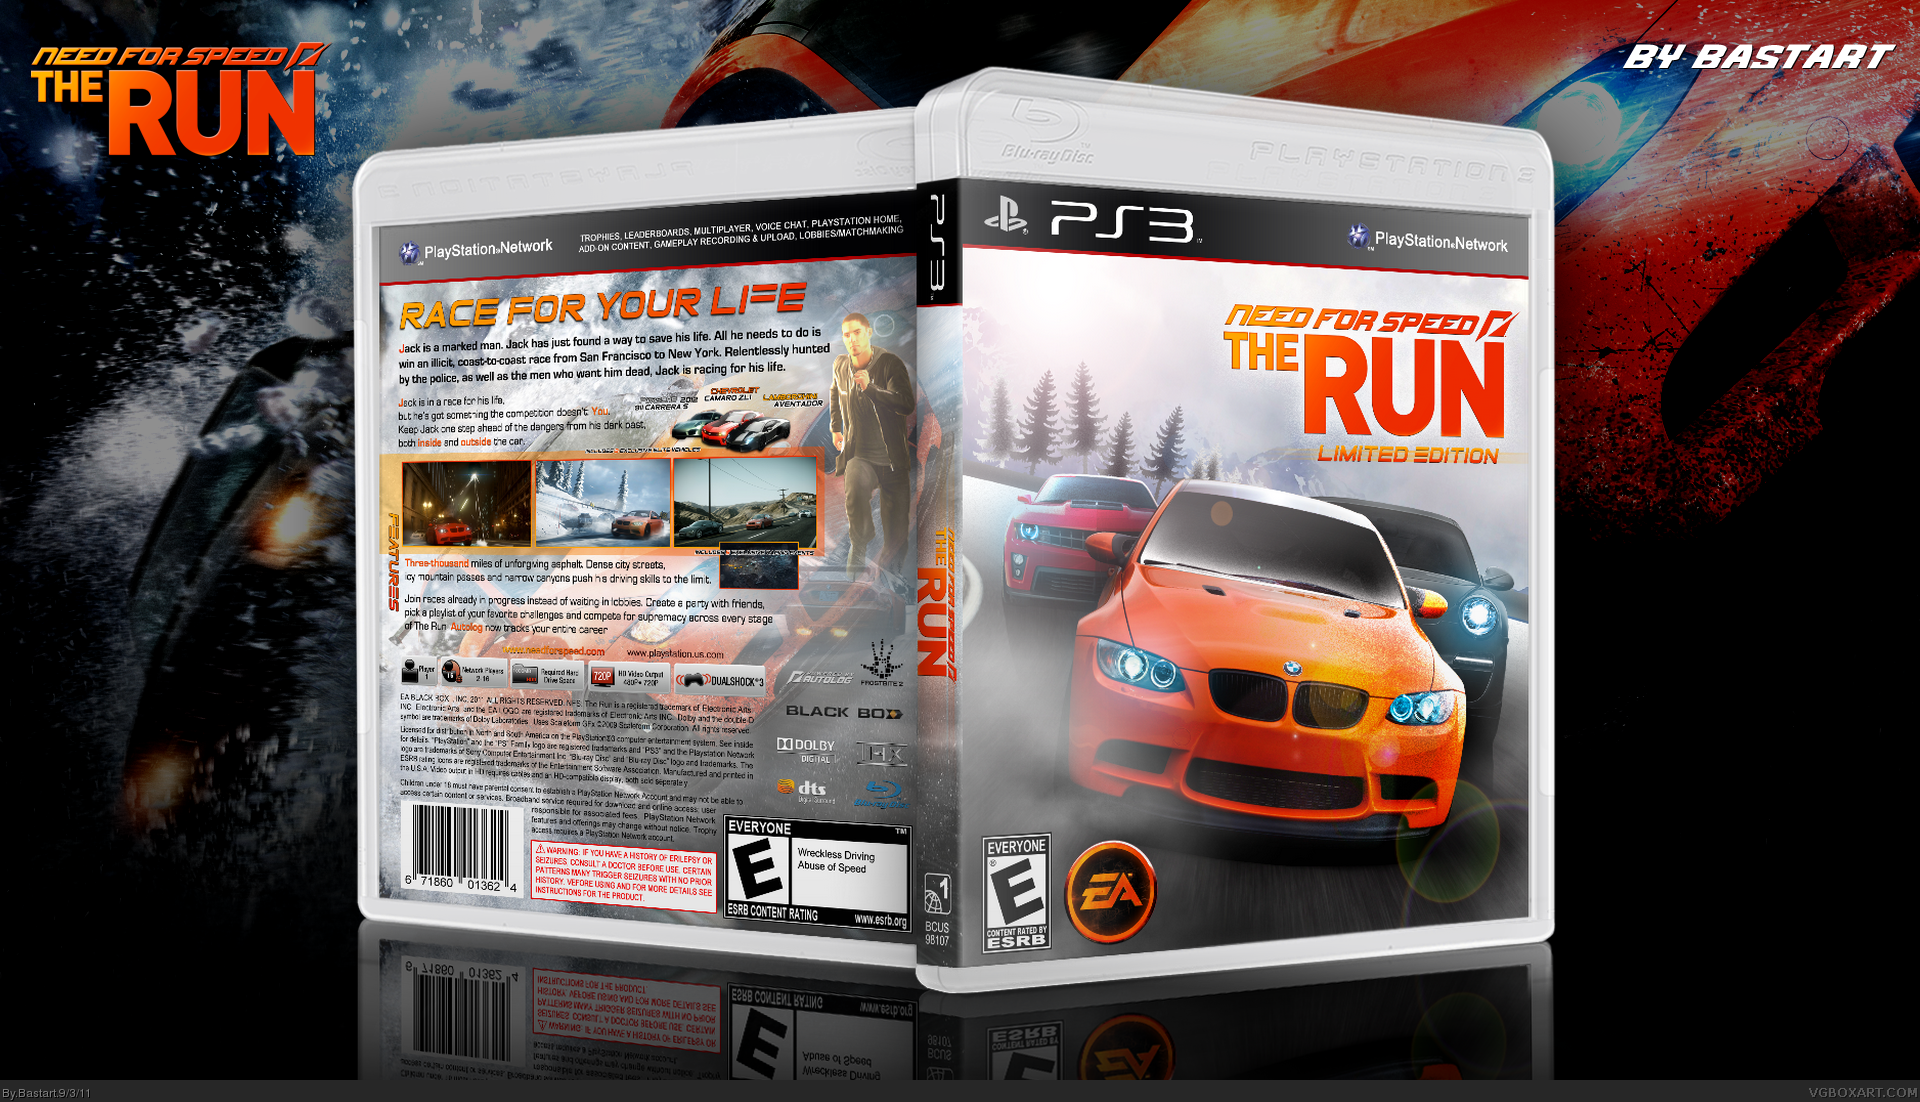 Need for Speed: The Run (Limited Edition) box cover